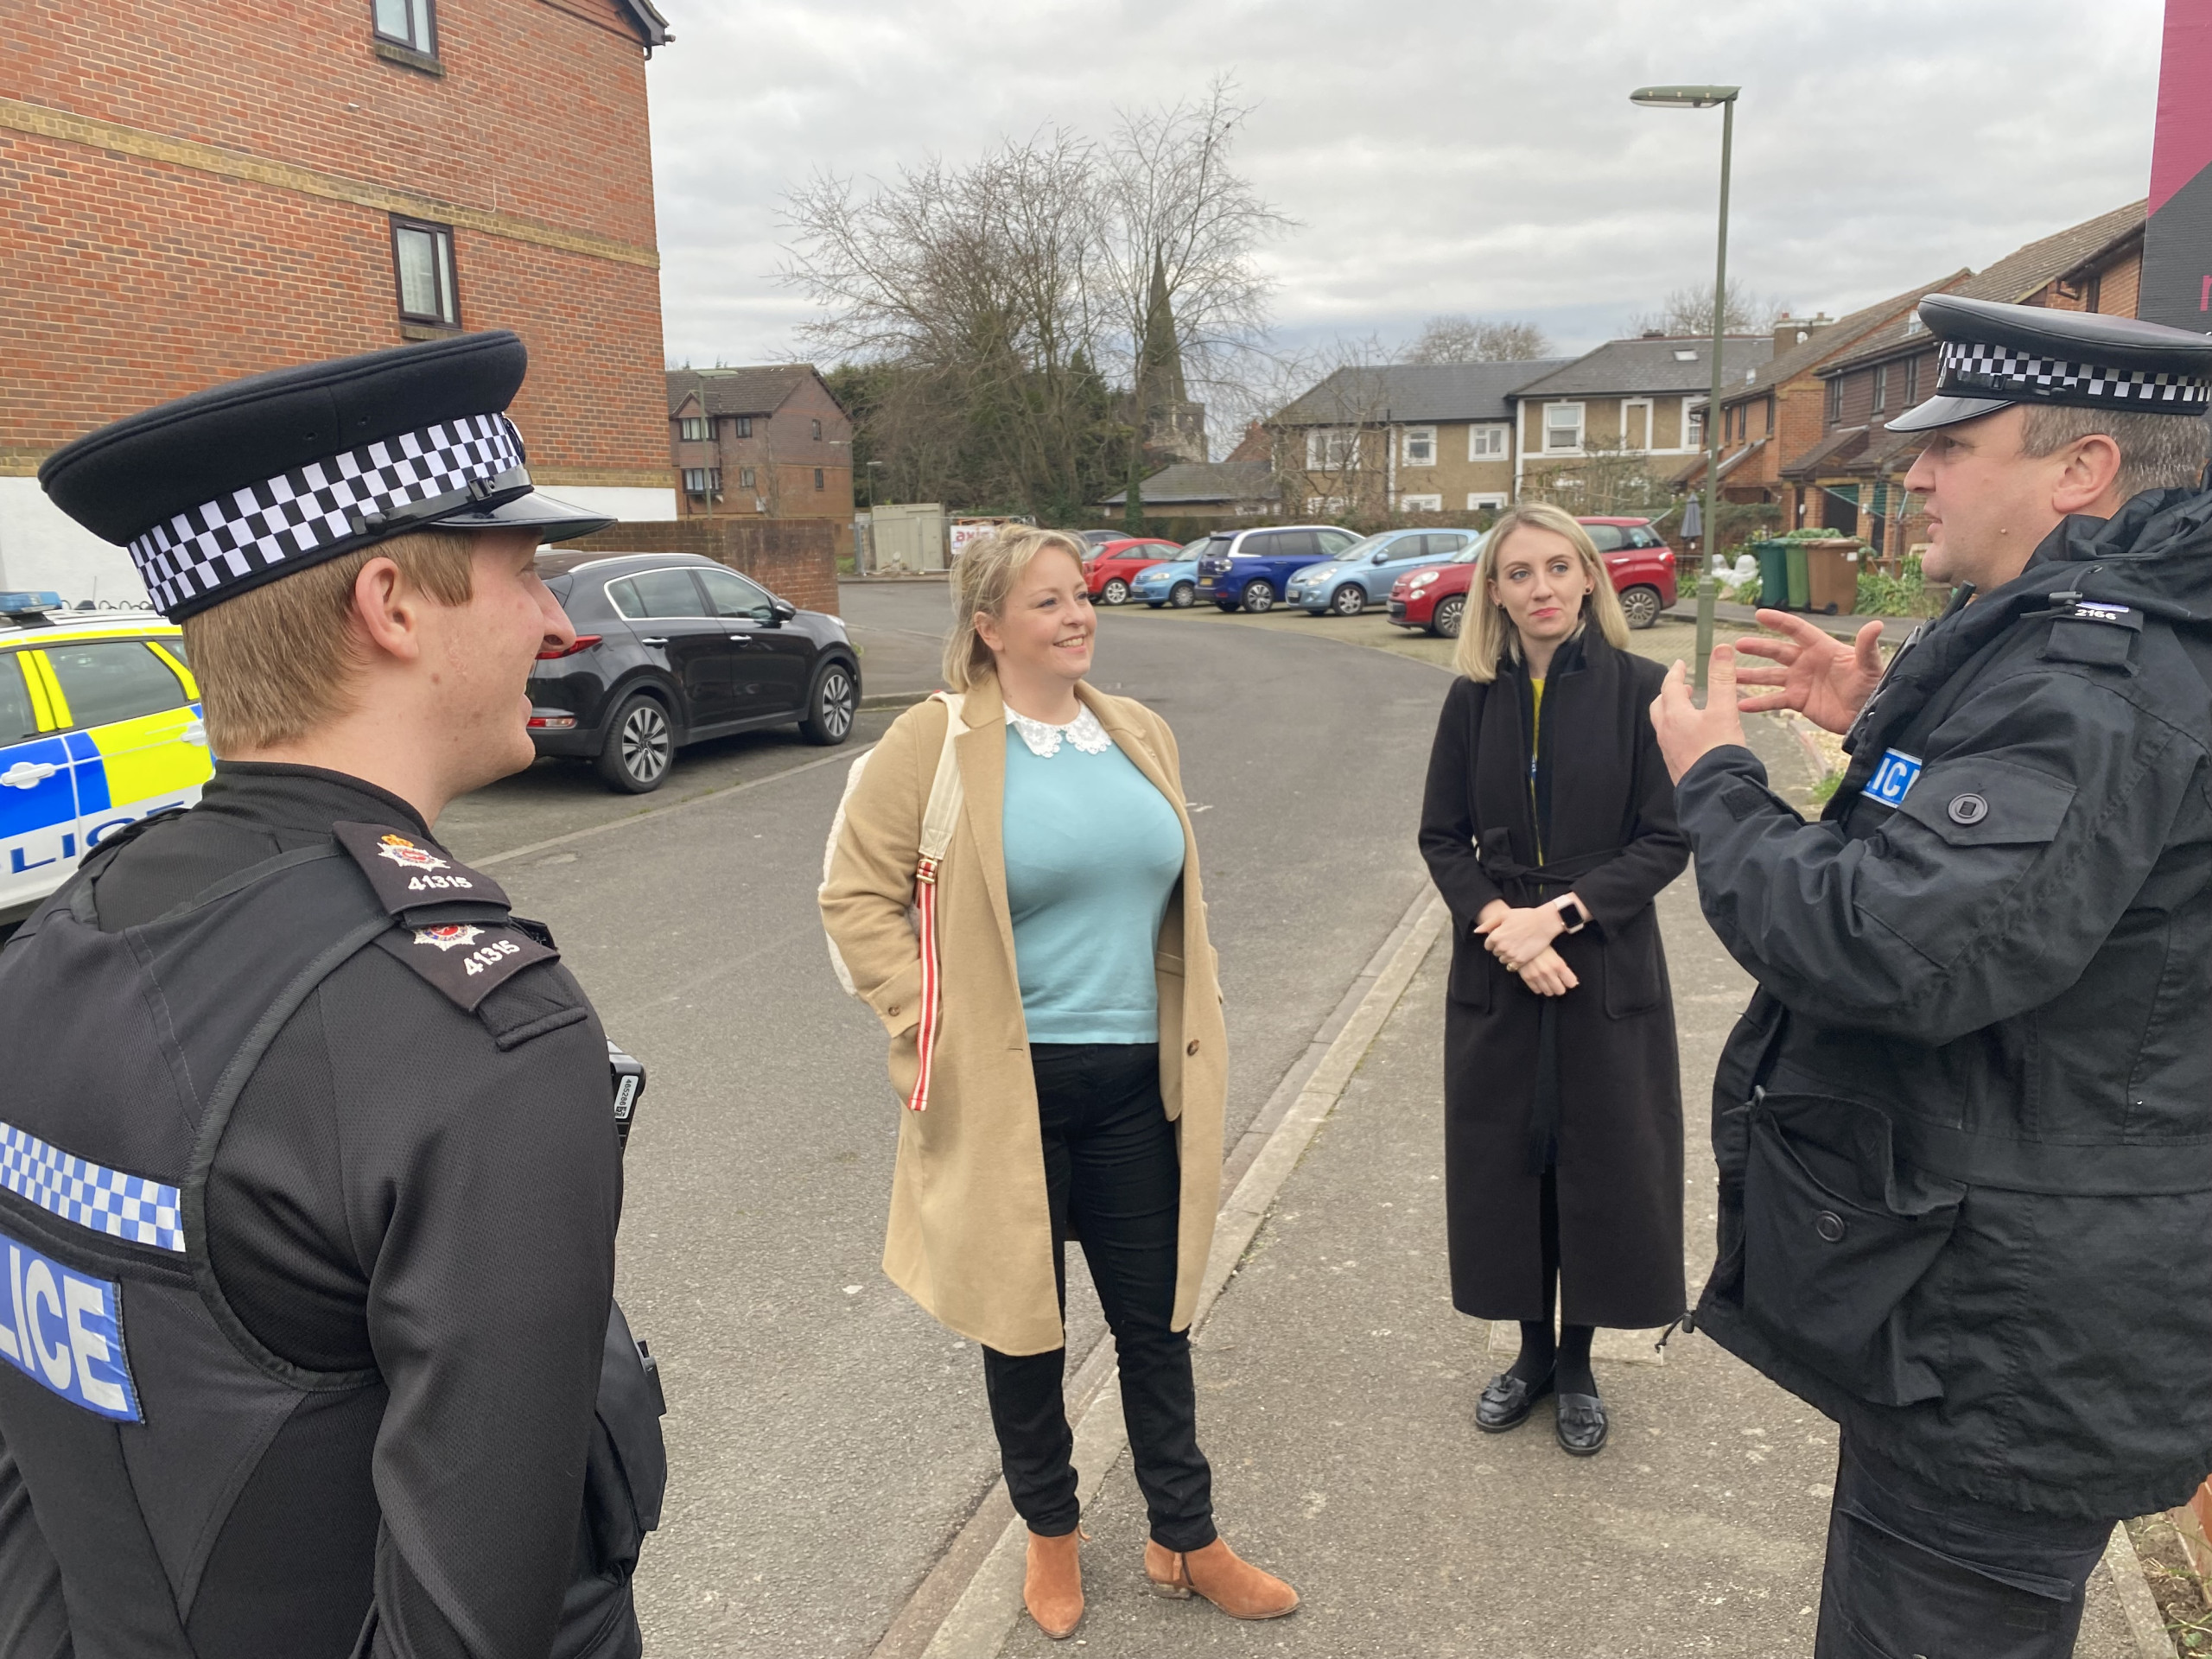 Police and Crime Commissioner Lisa Townsend and Deputy Police and Crime Commissioner Ellie Vesey-Thompson speaking with local police officers